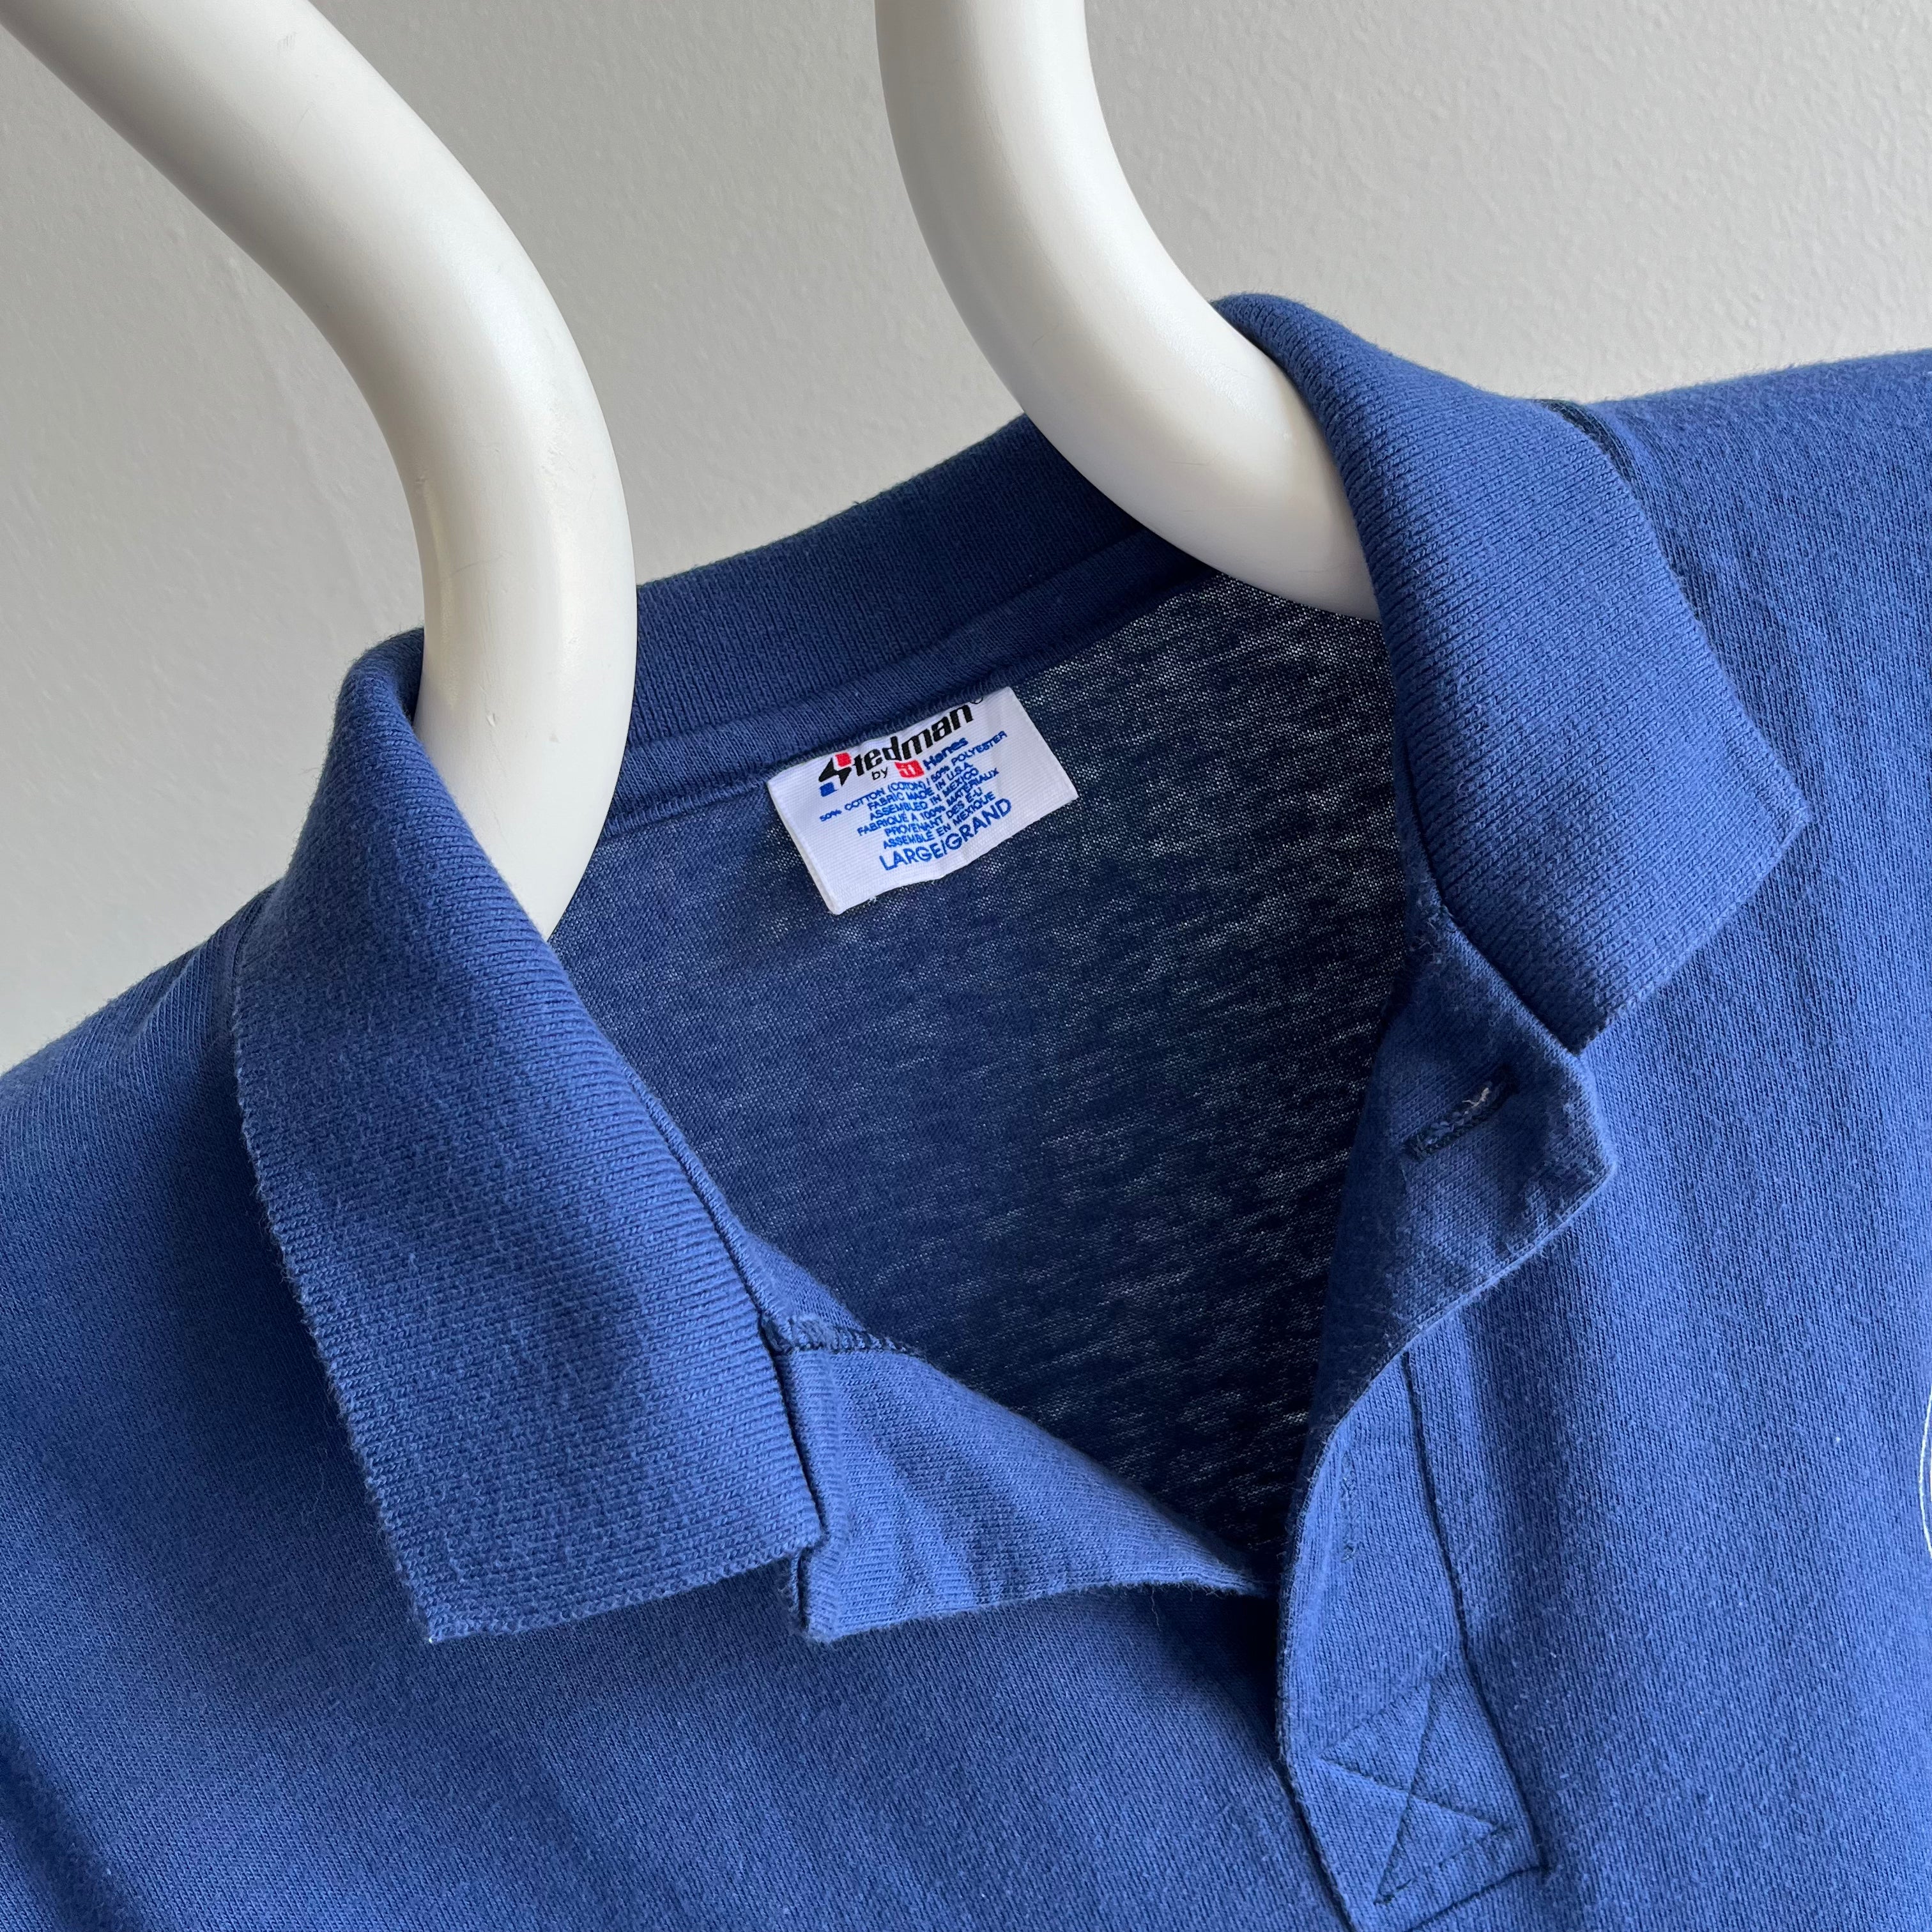 1980/90s New York State - Decade of the Child - Polo Shirt